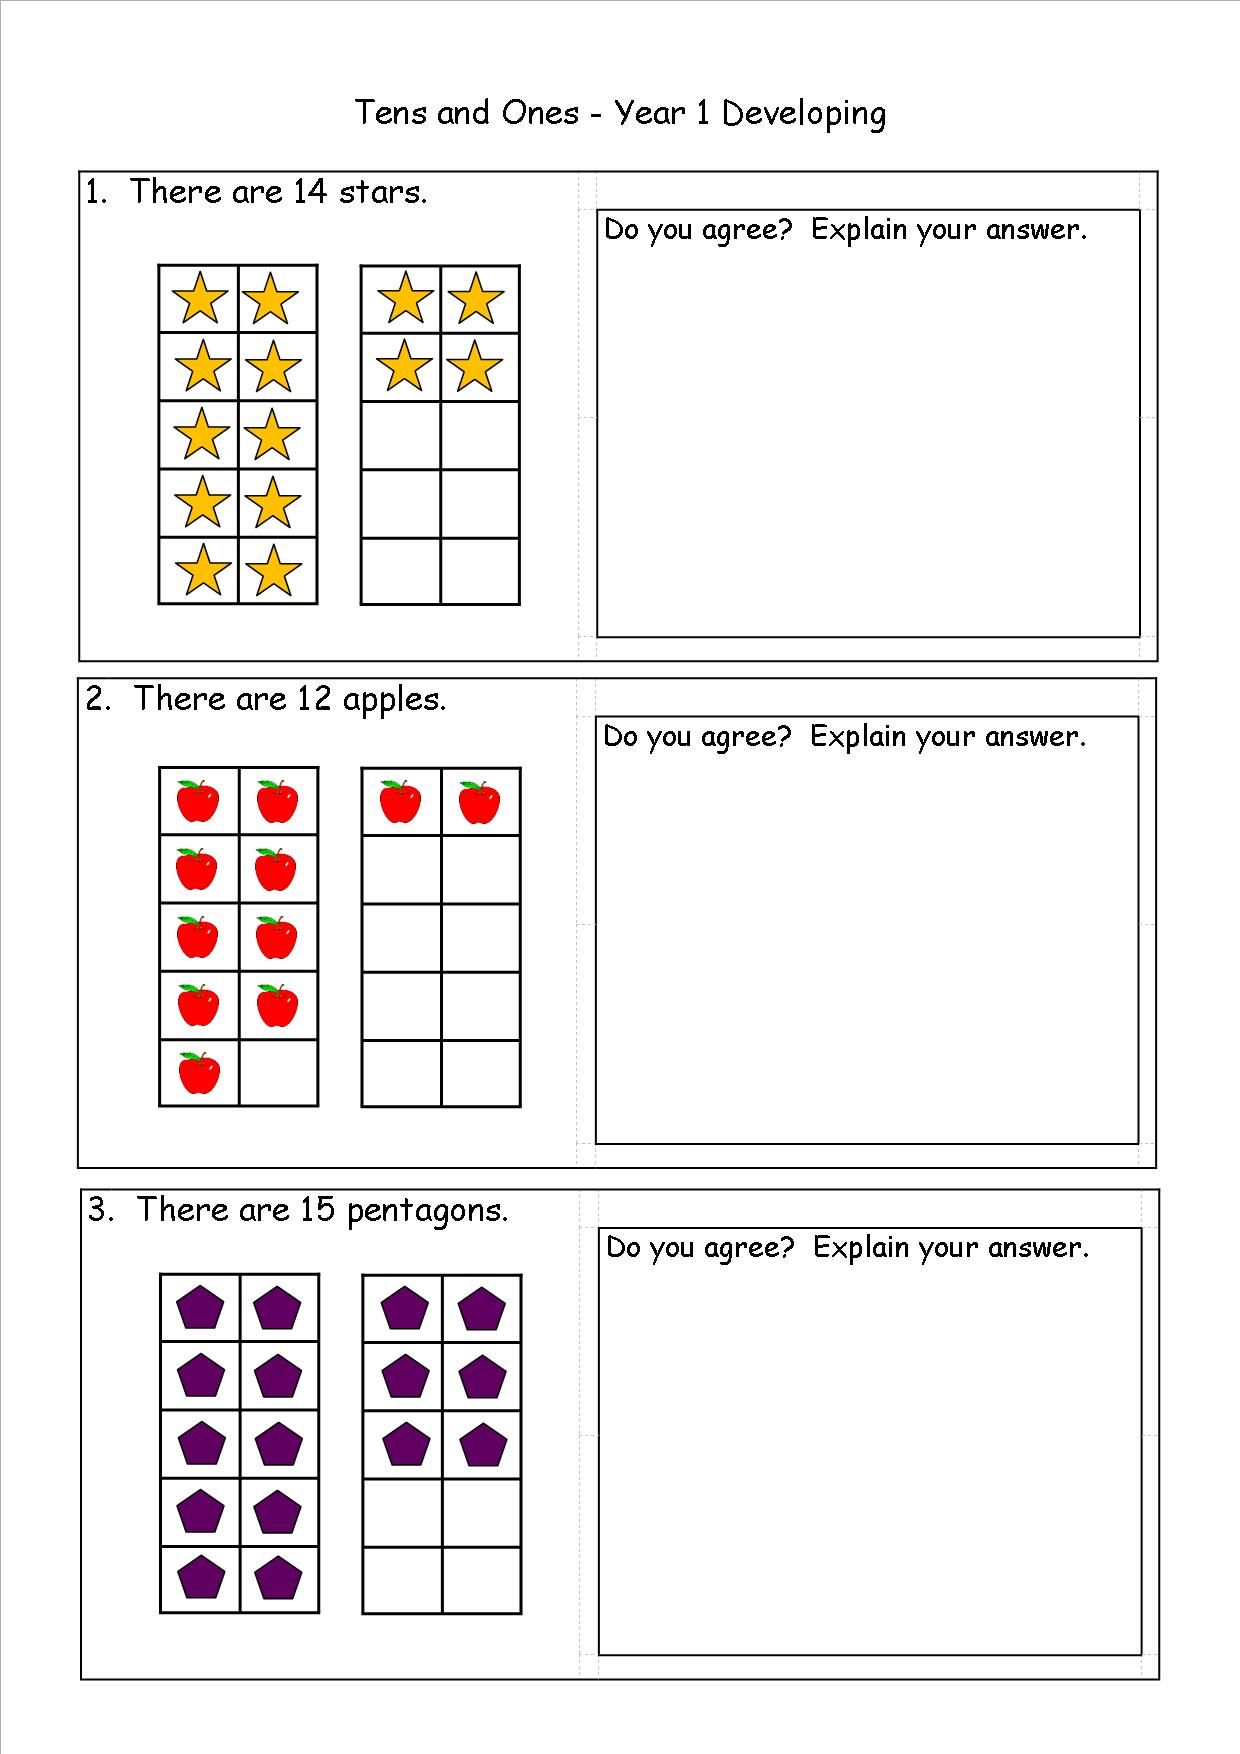 eyfs-ks1-year-1-sen-numeracy-teaching-resources-reasoning-and-problem-solving-worksheets